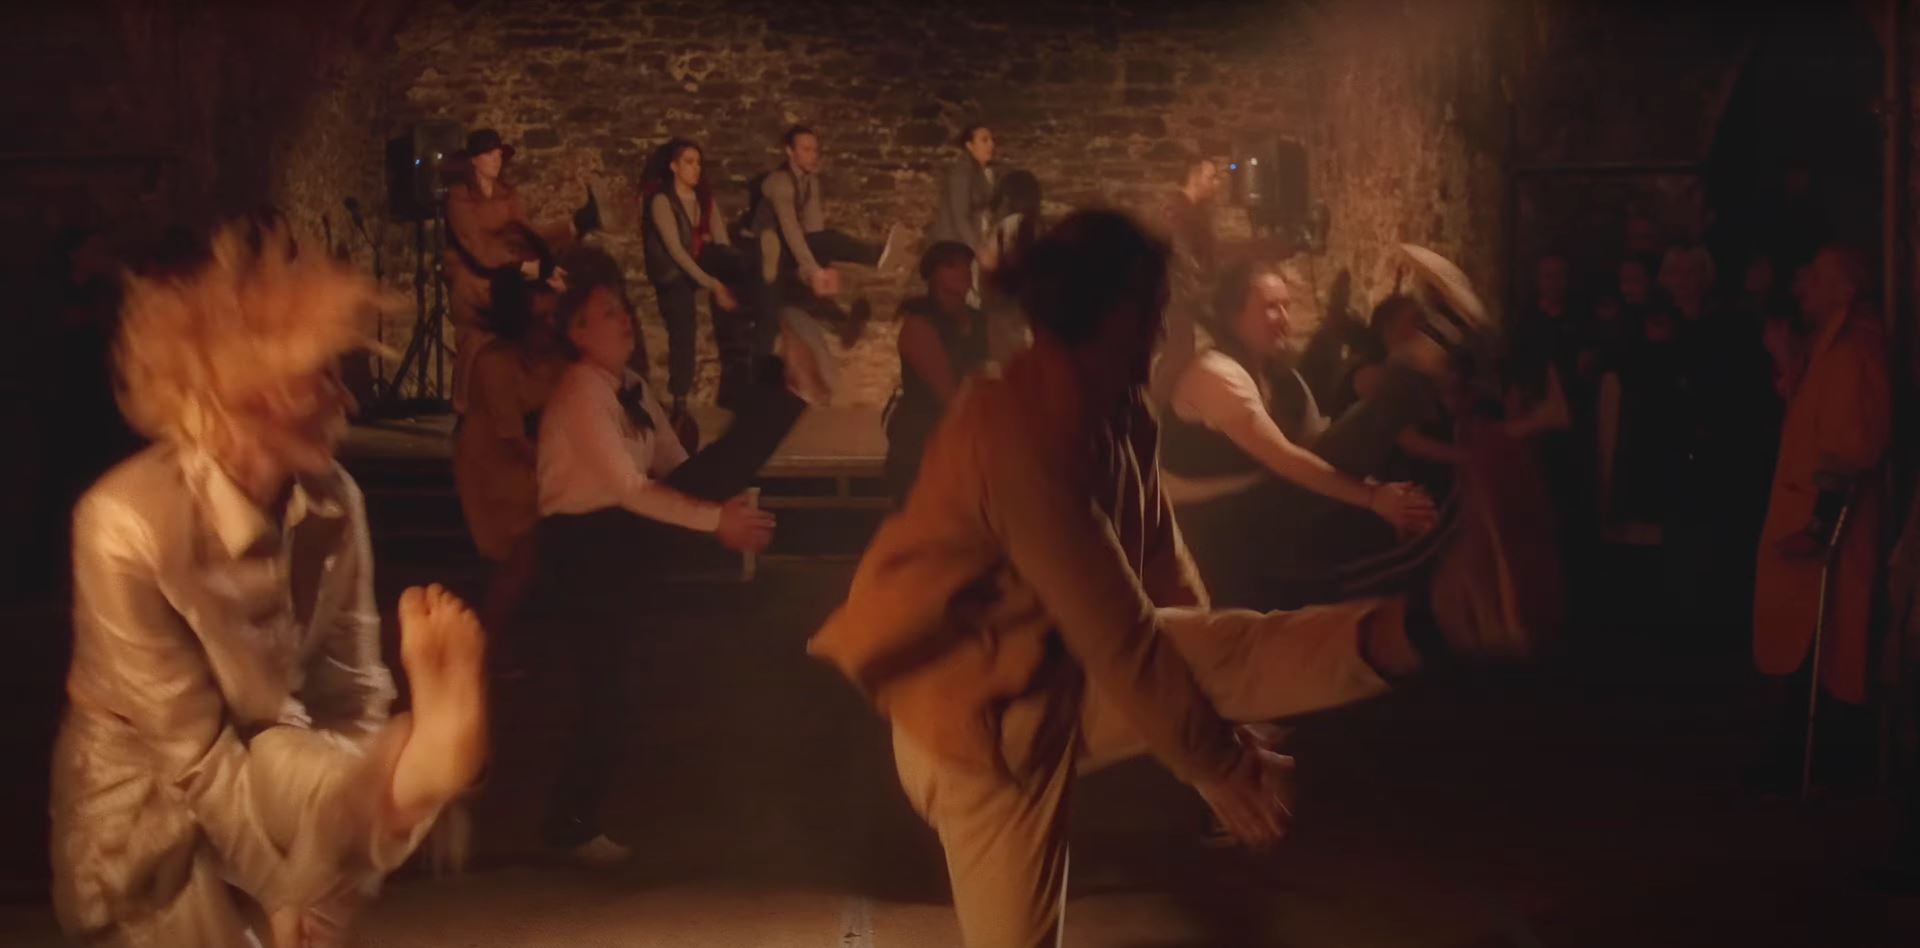 A large group of dancers perform in an underground venue